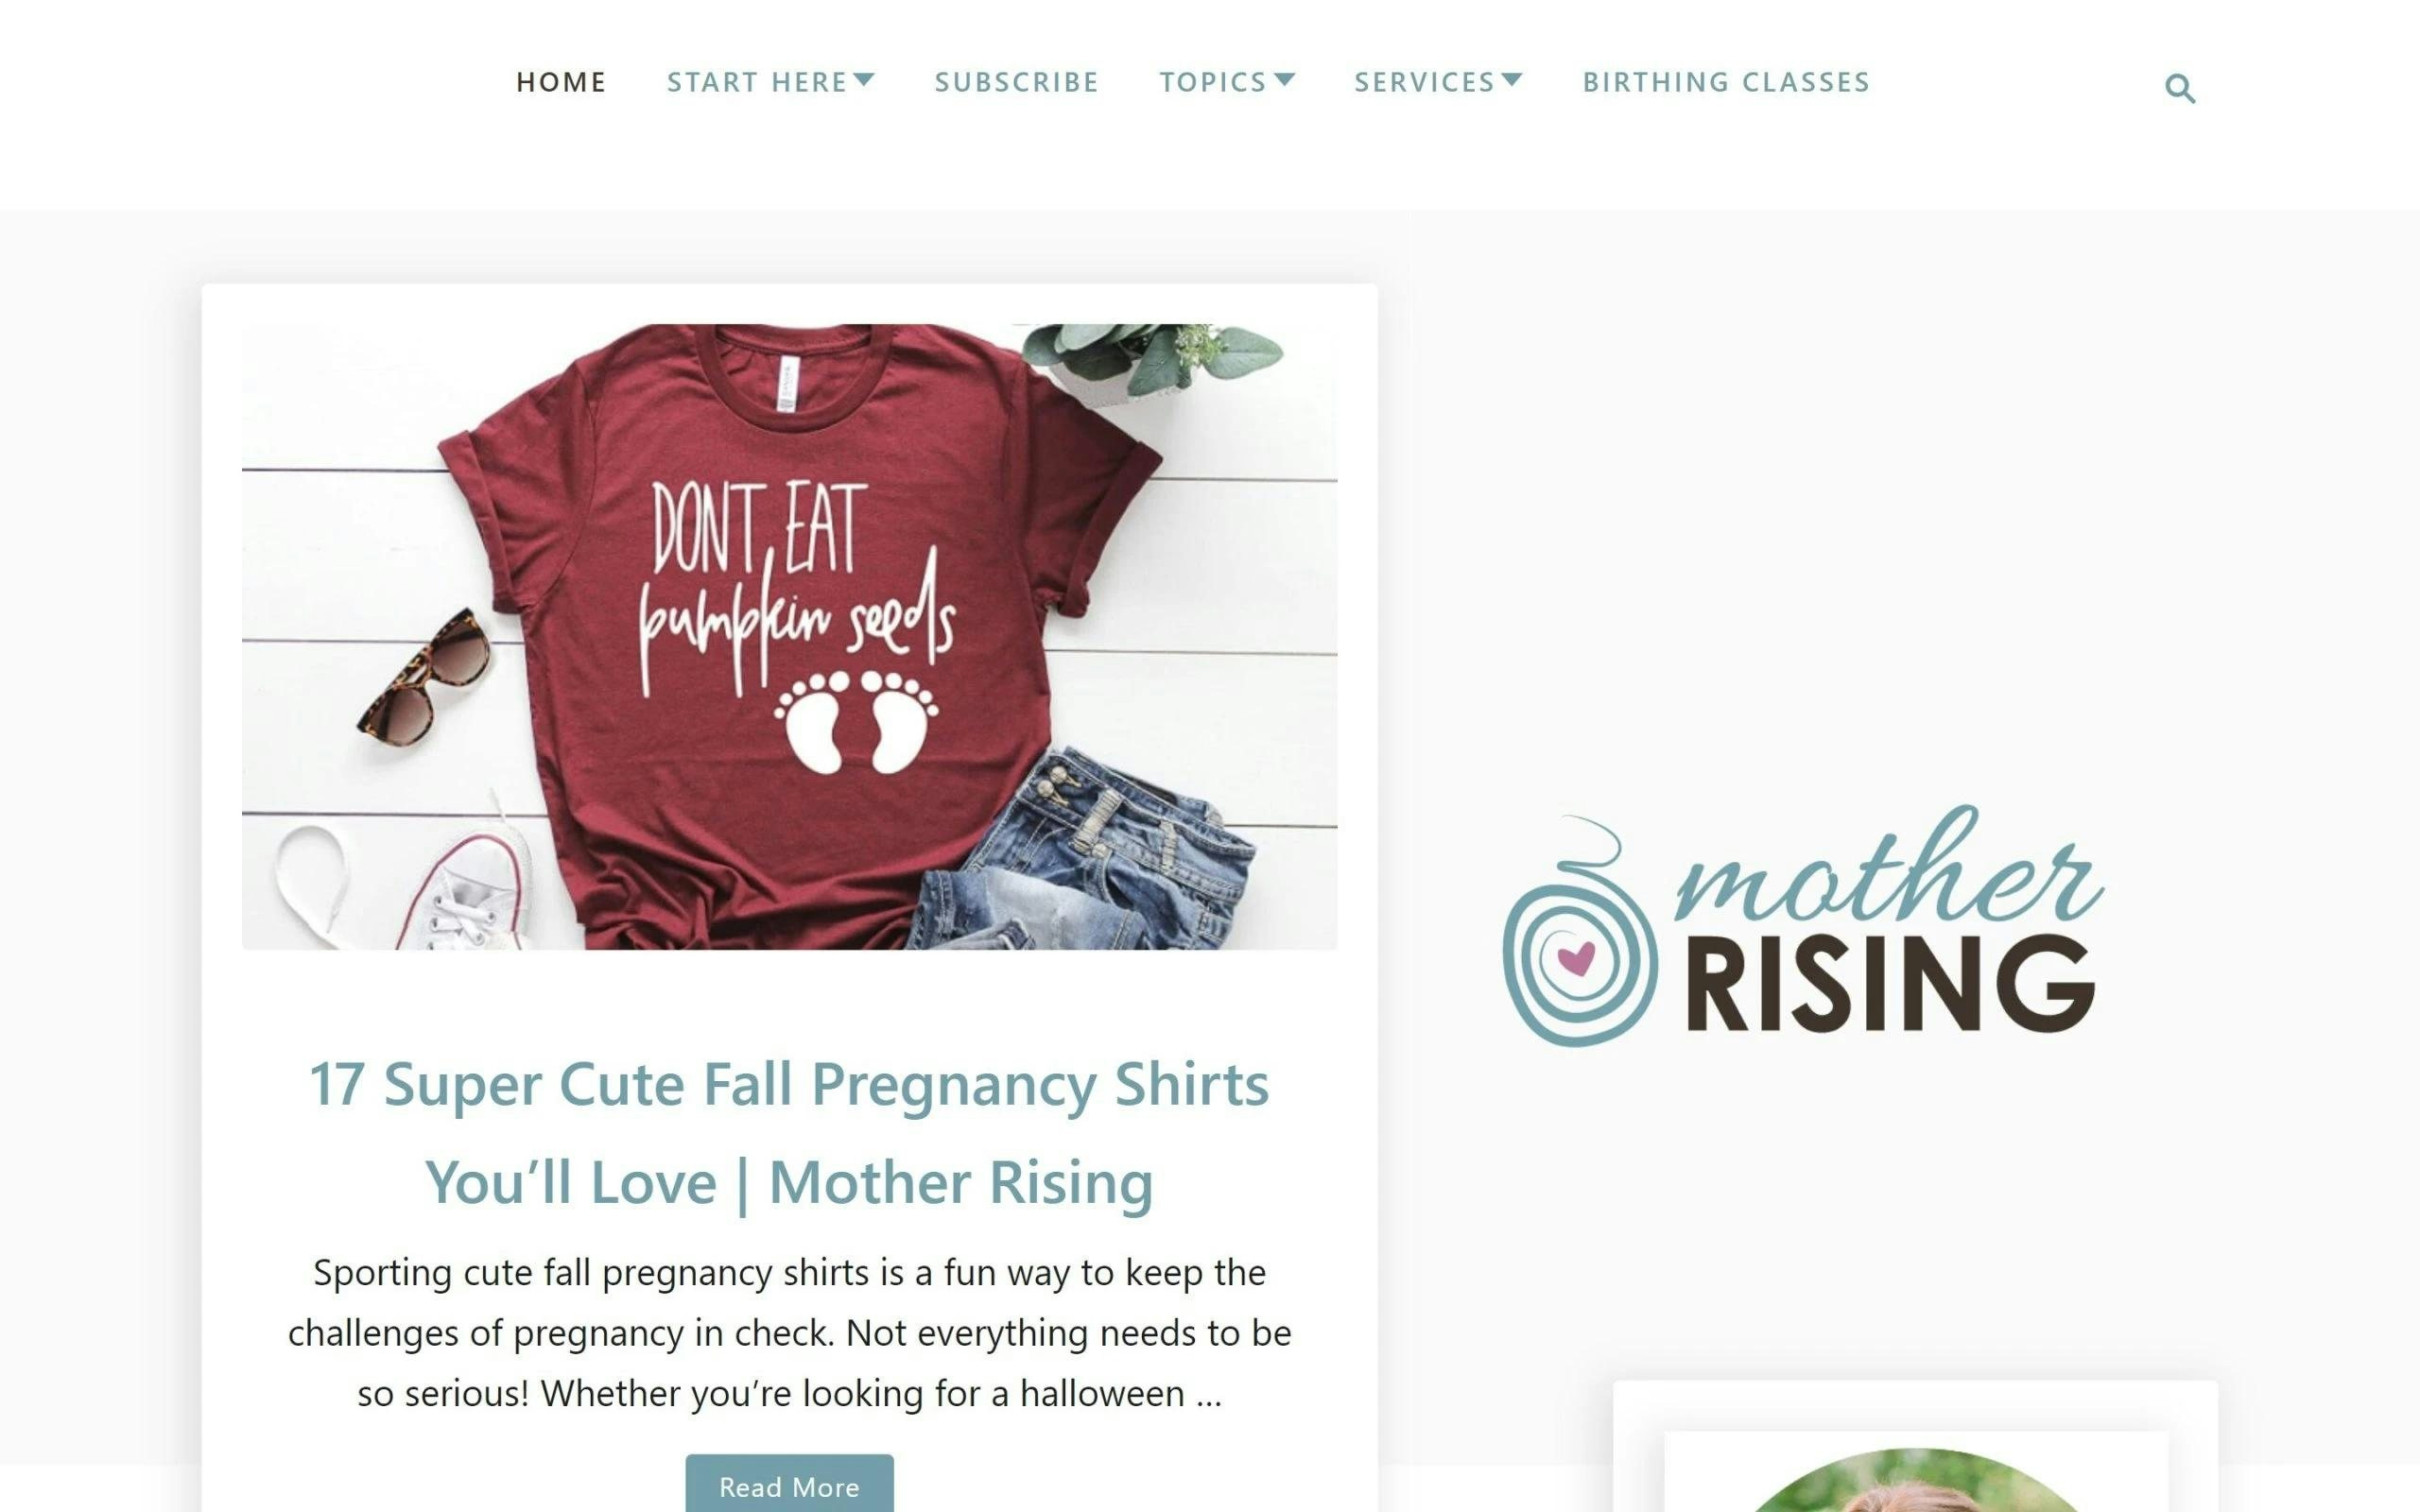 Mother Rising mom blogs